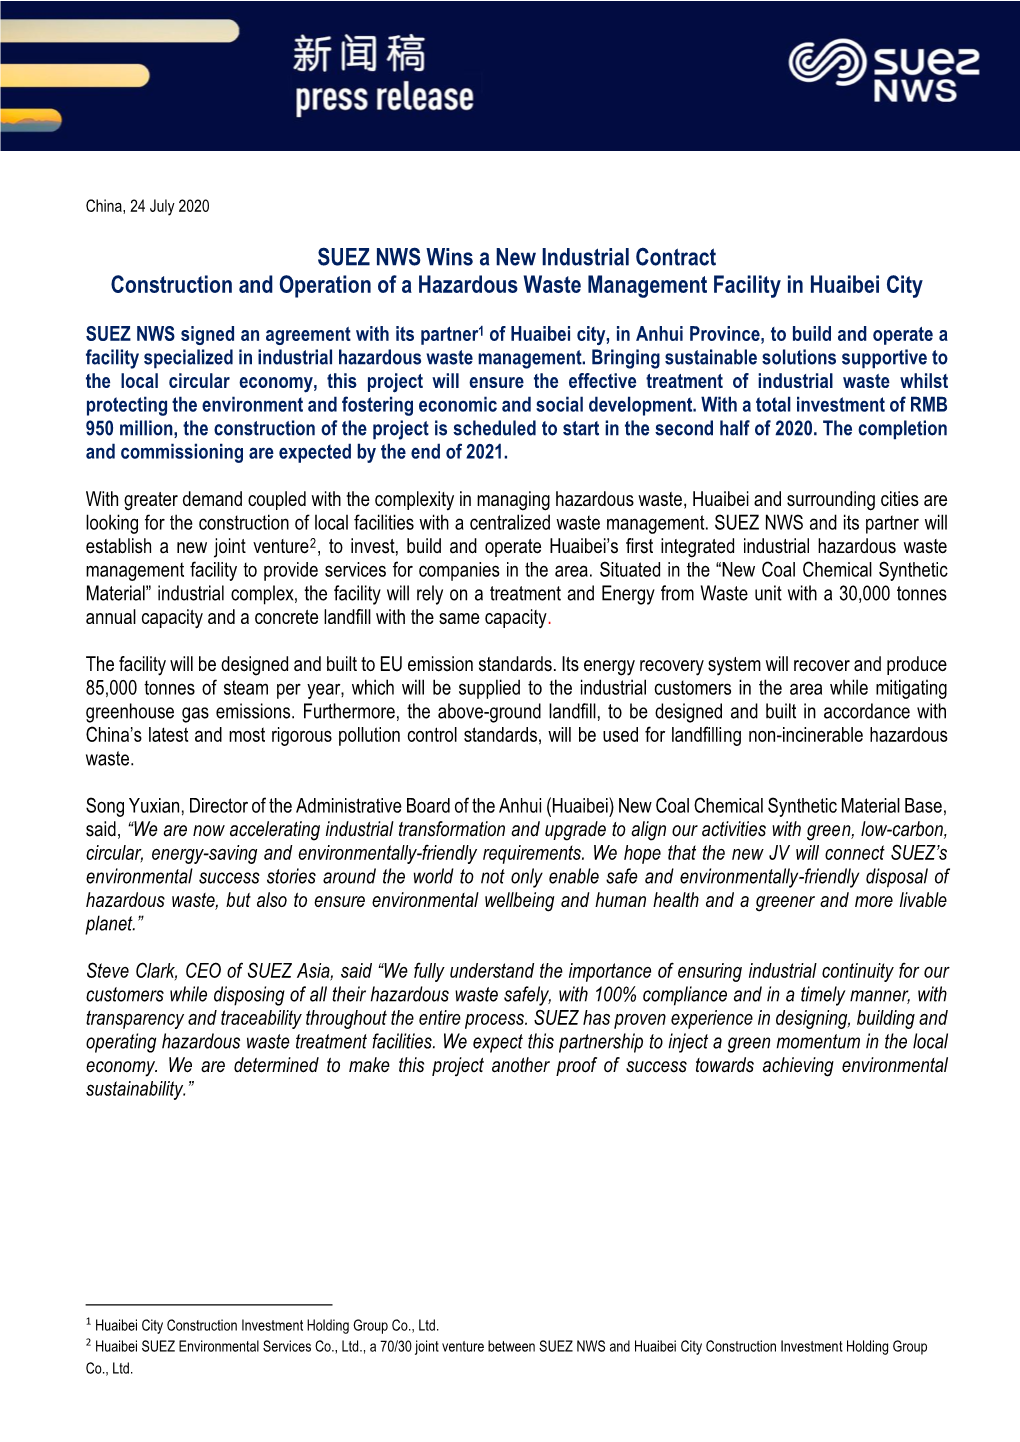 SUEZ NWS Wins a New Industrial Contract Construction and Operation of a Hazardous Waste Management Facility in Huaibei City